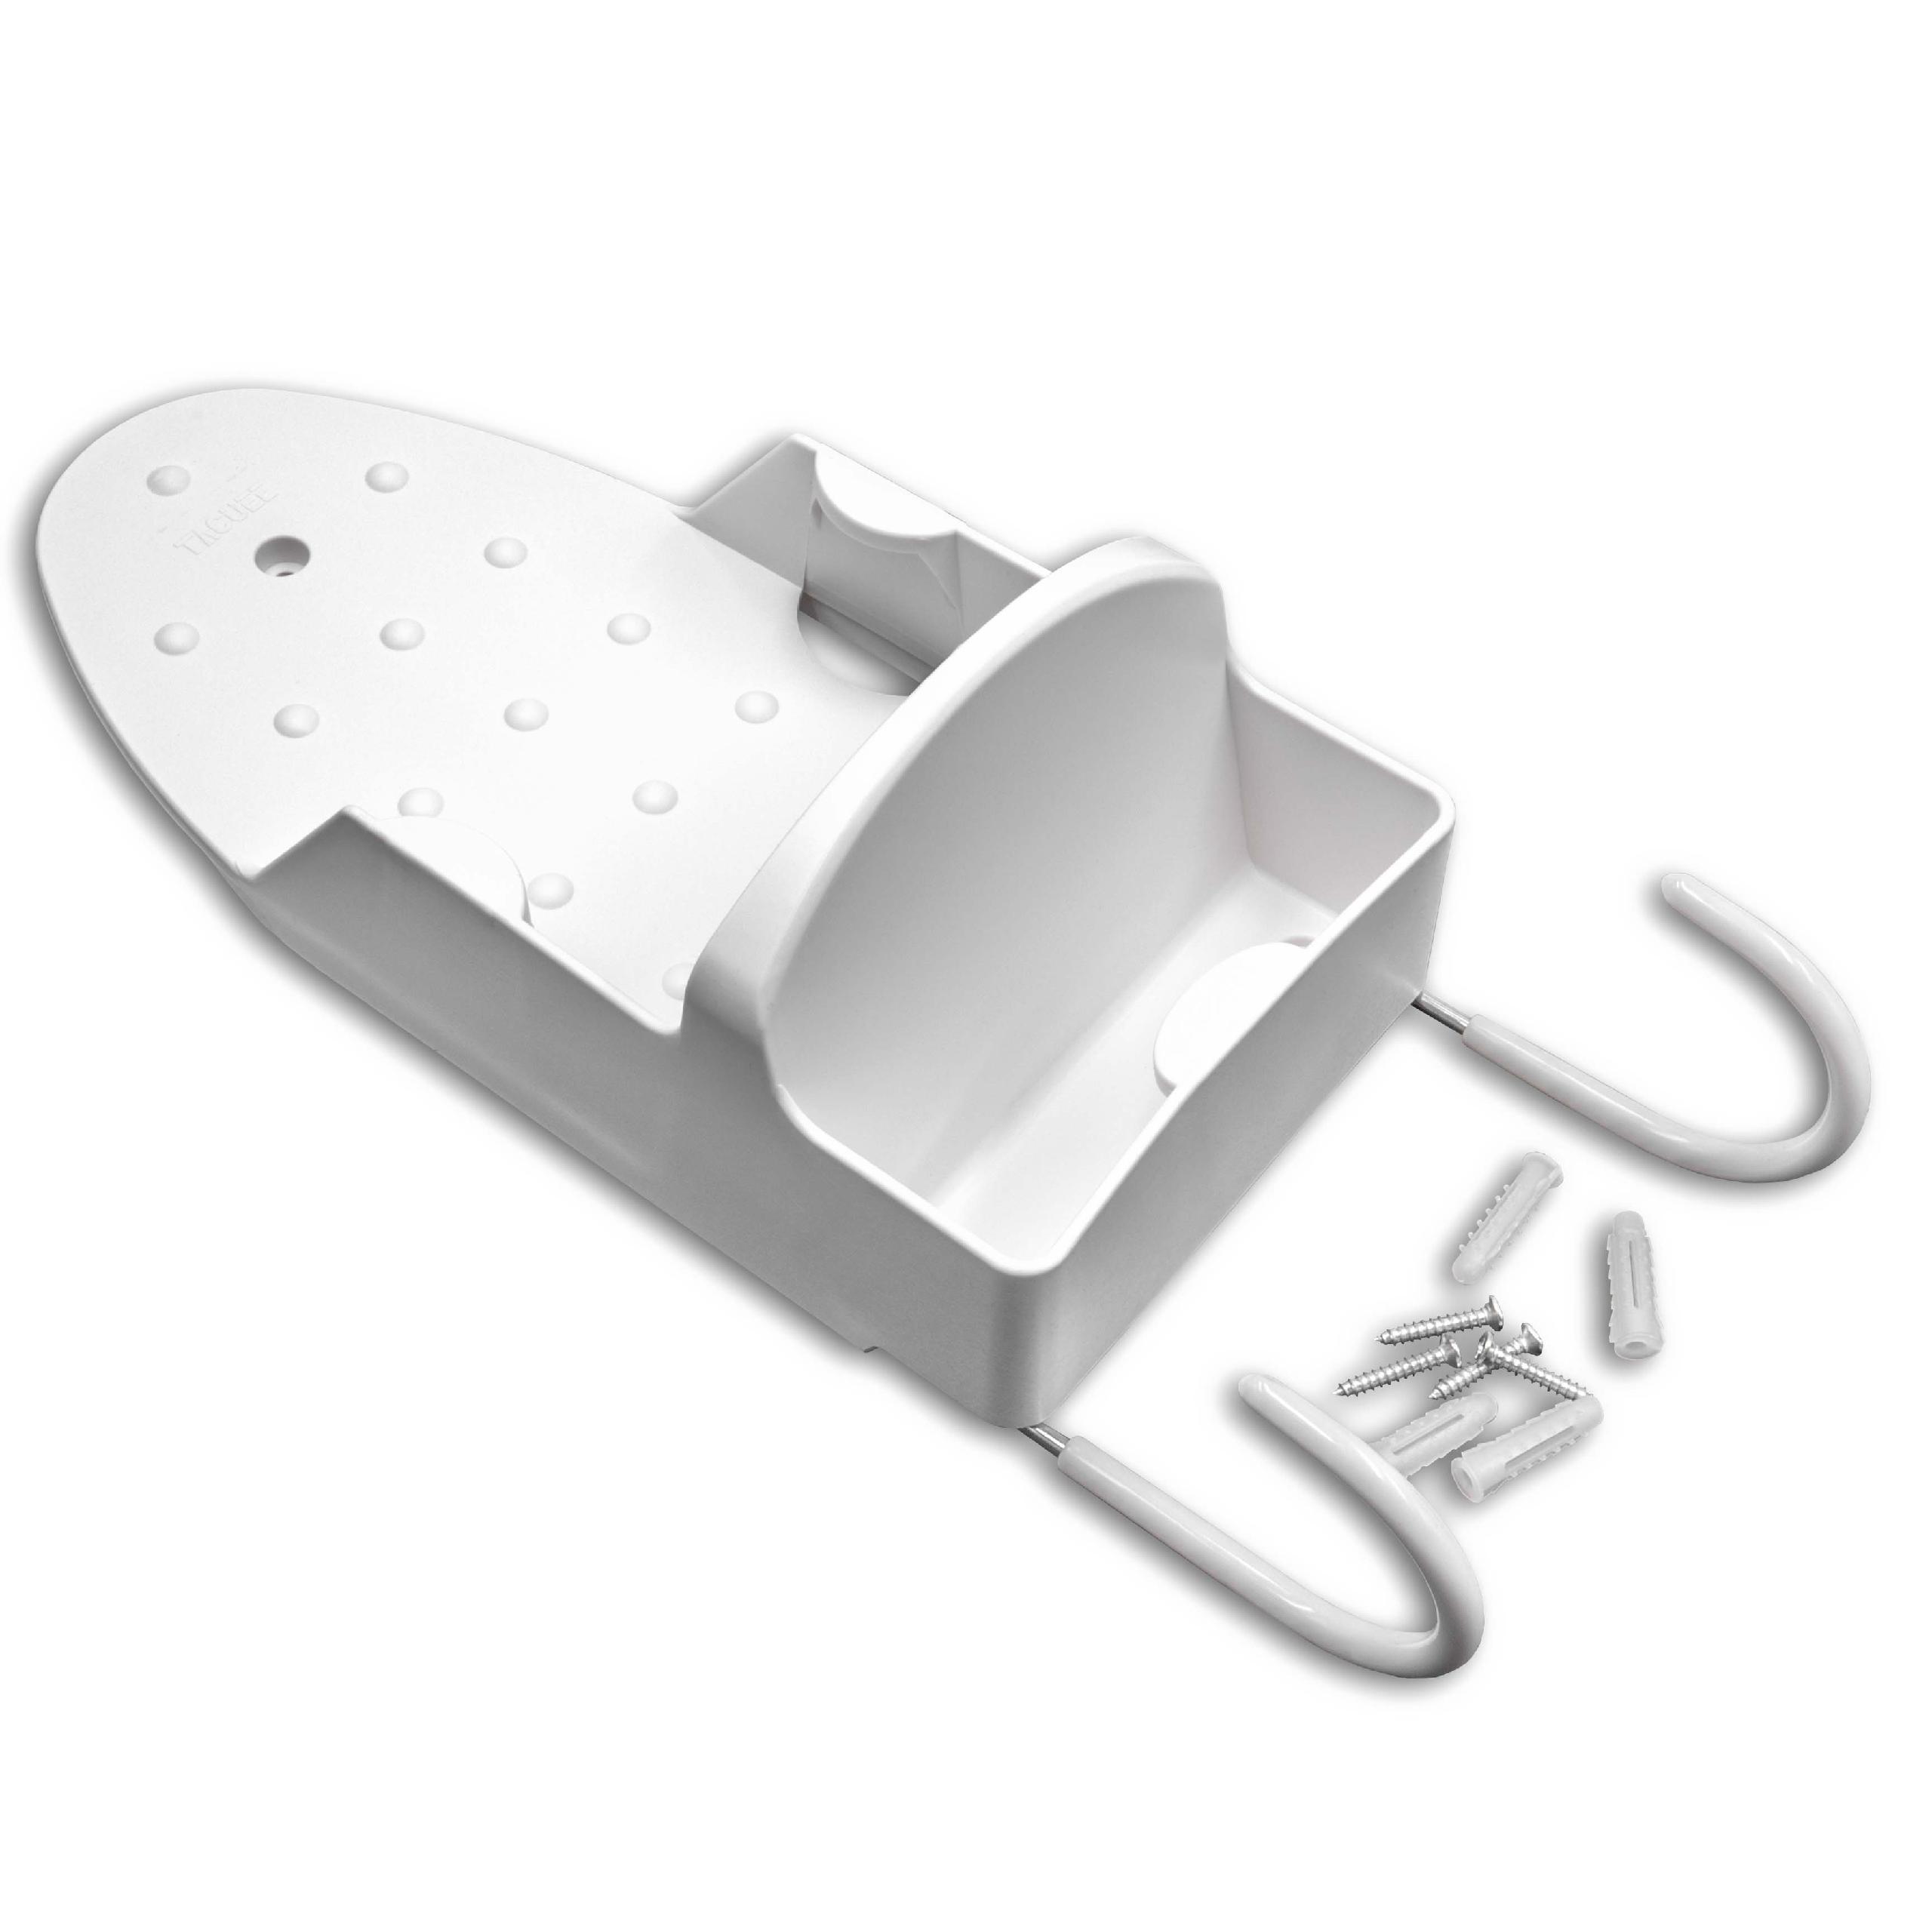 Steam Iron Holder suitable for Iron, Ironing Board - 11.5 x 22.5 x 9 cm, White